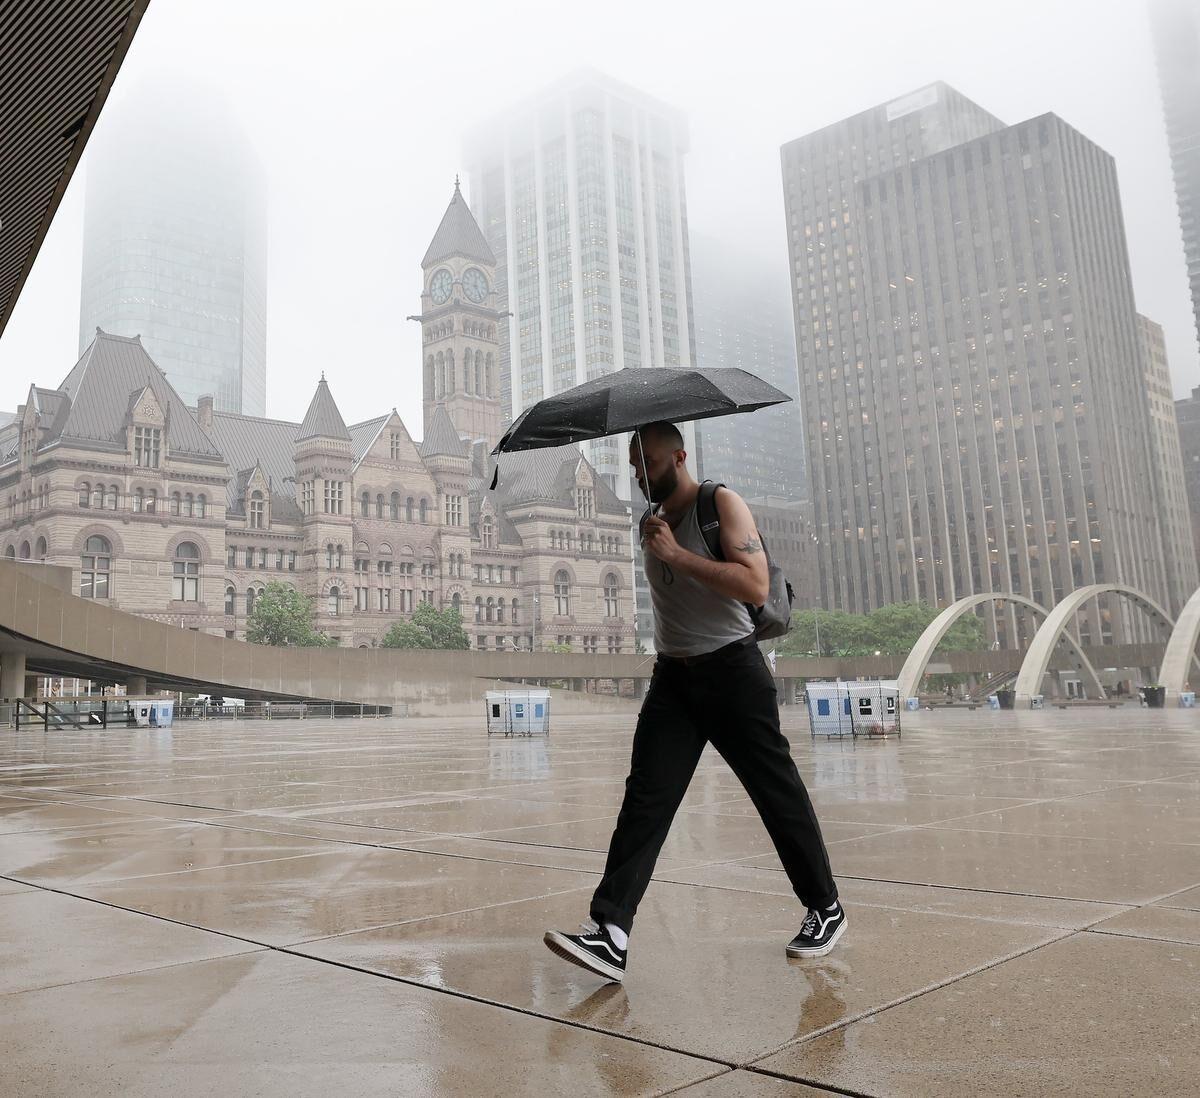 Toronto Canada Day weather forecast calls for thunderstorms